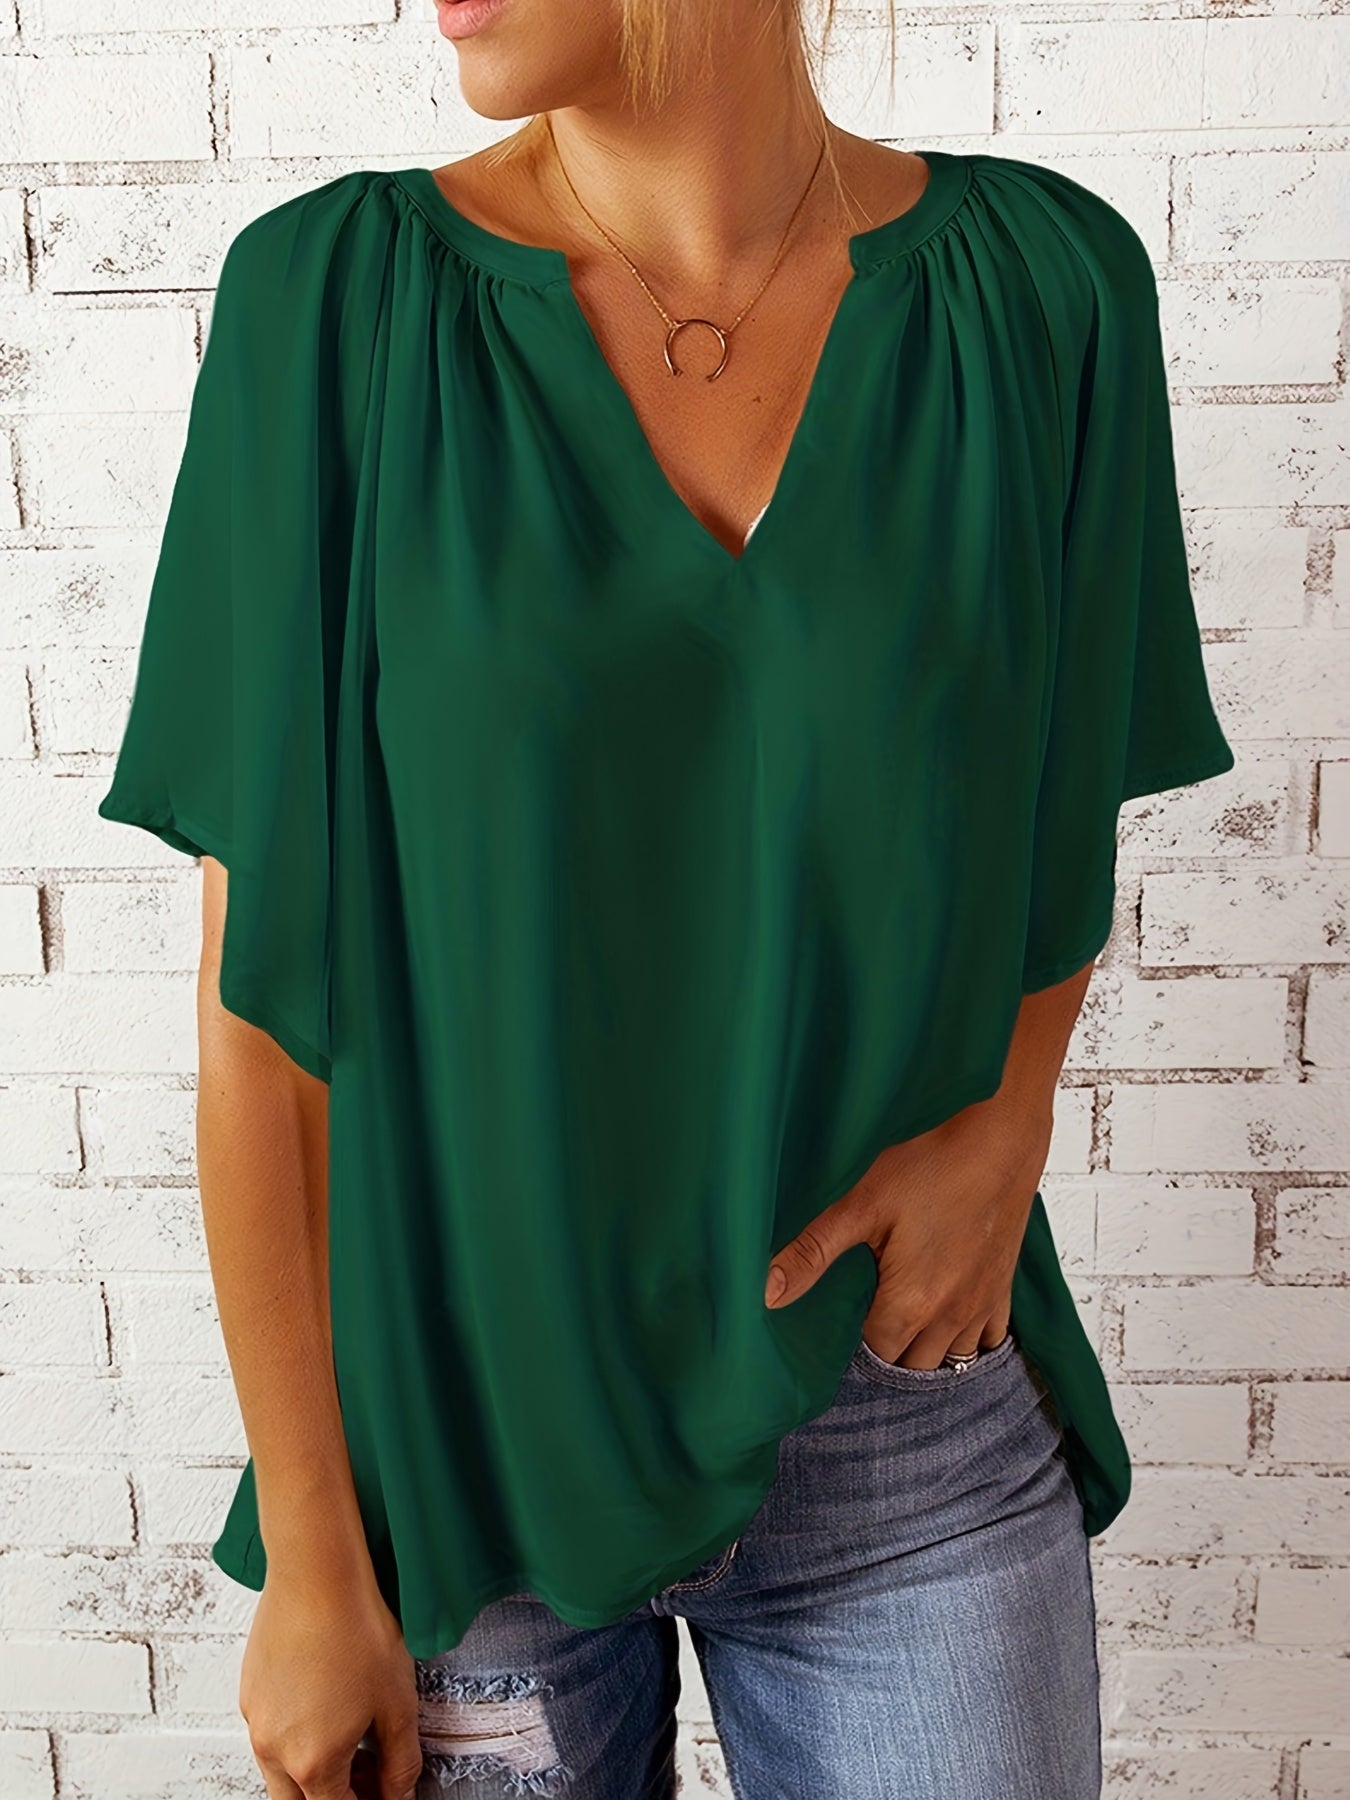 「lovevop」Notched Neck Loose Blouse, Casual Top For Summer & Spring, Women's Clothing